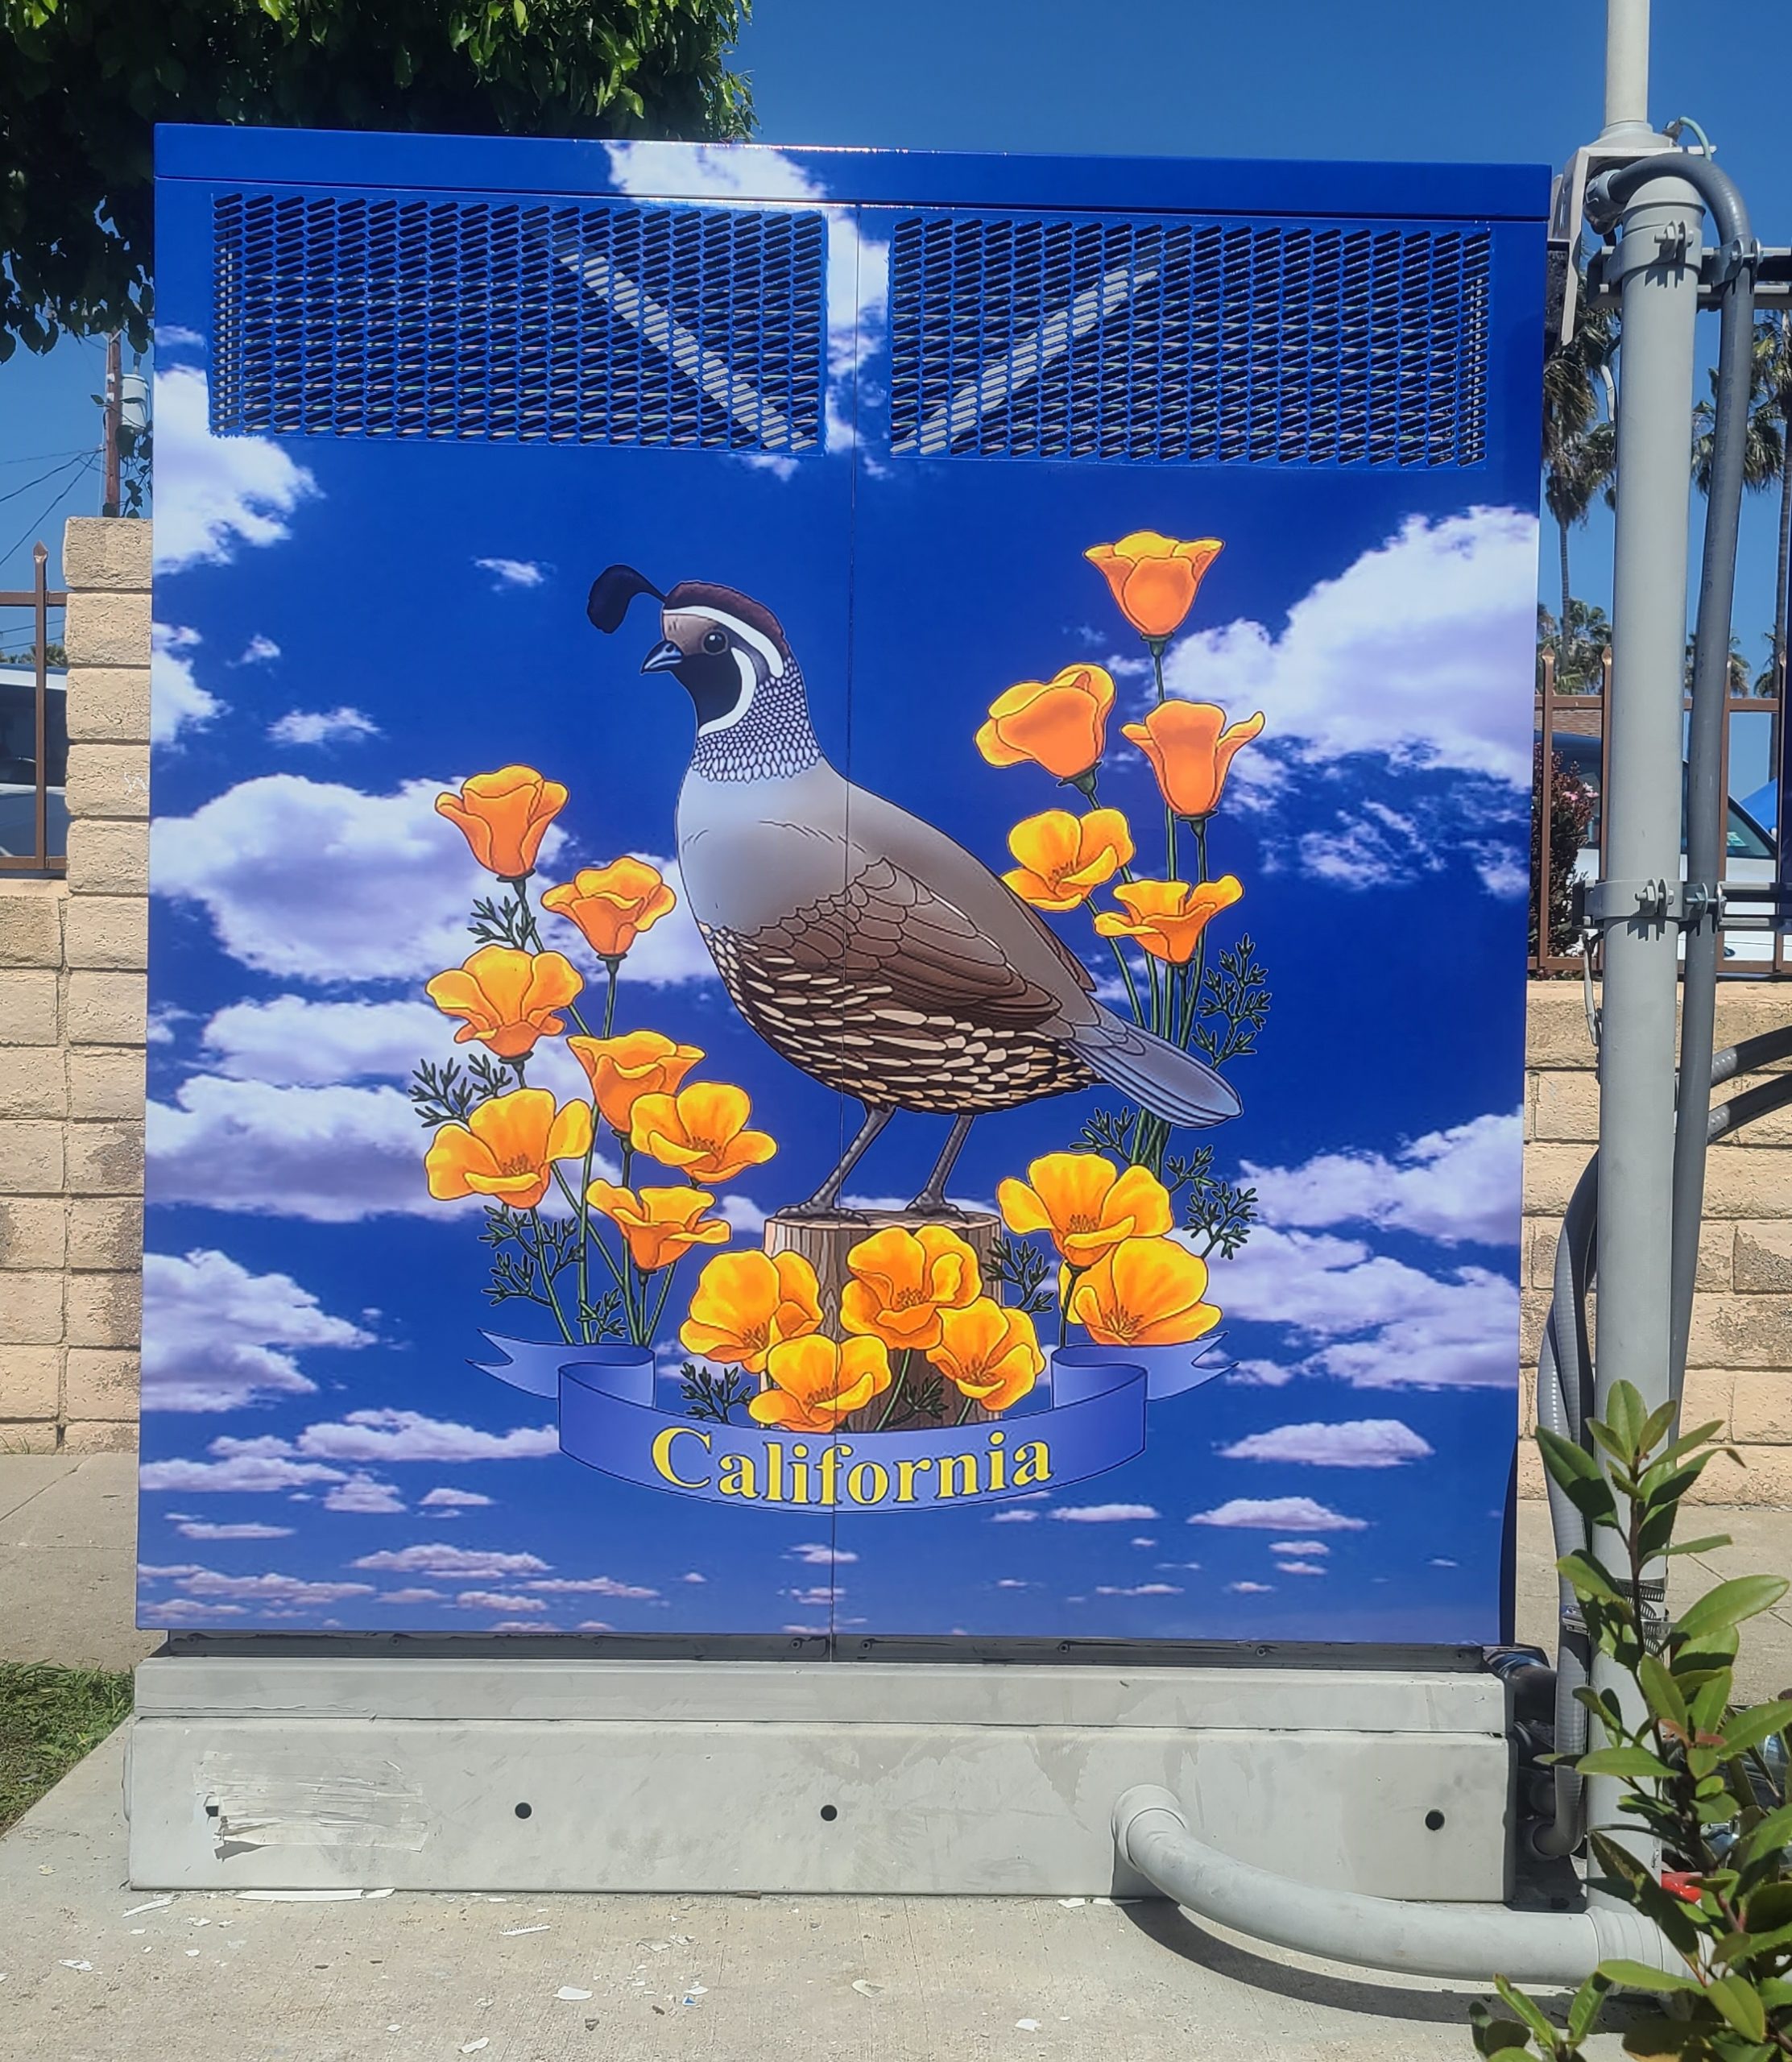 This is the full utility box vinyl wrap we made and installed for Process Cellular in Santa Ana.